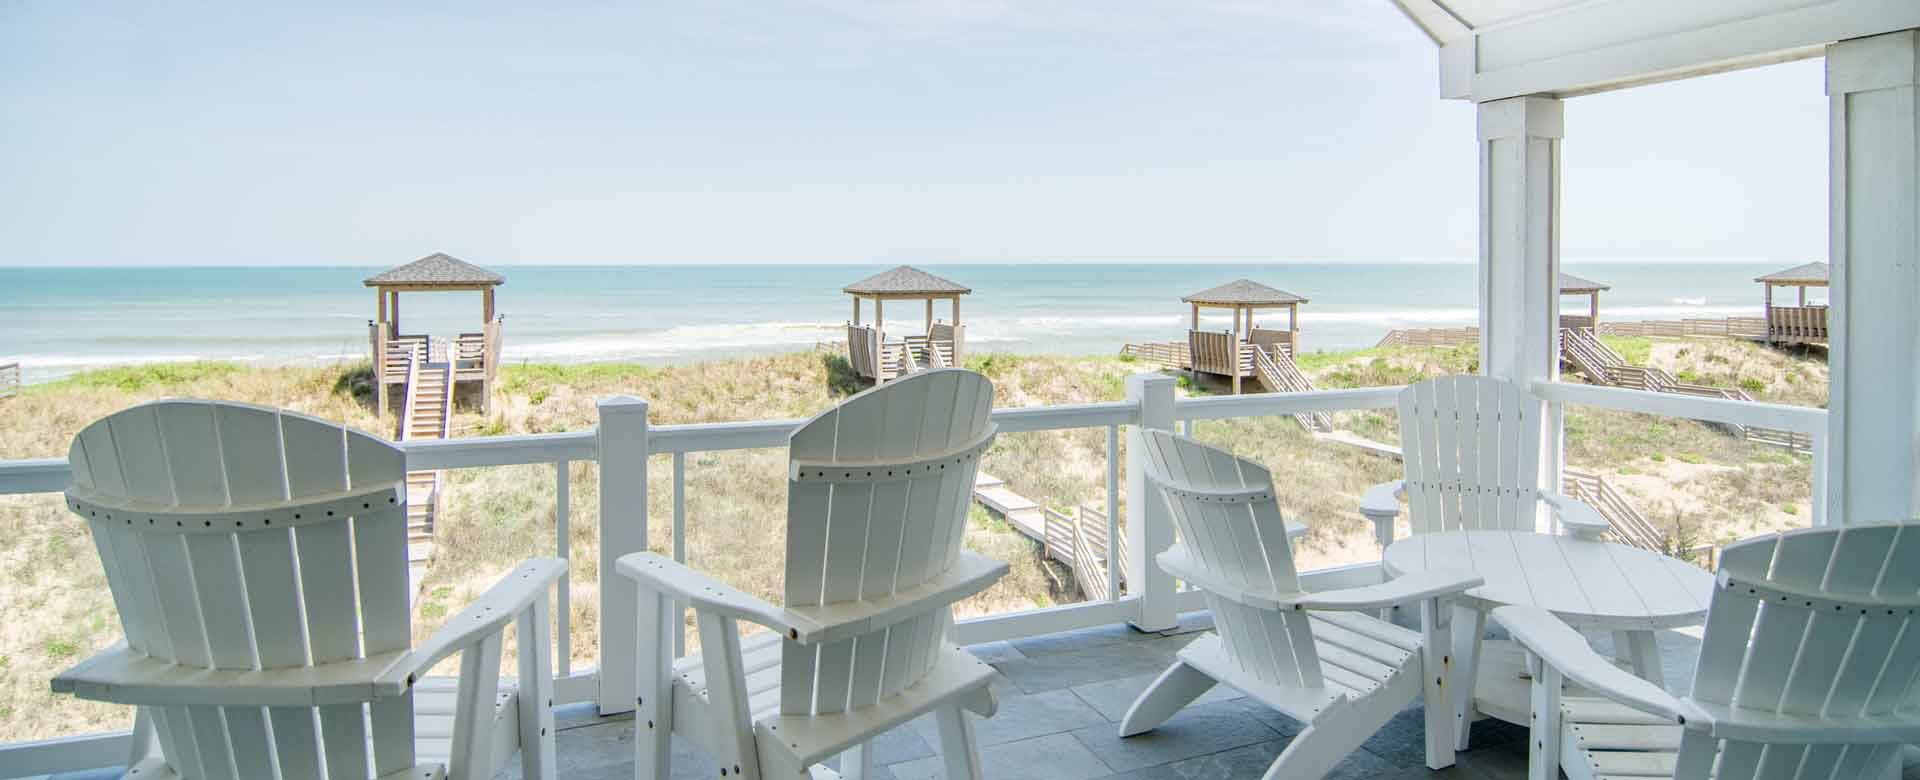 Outer Banks Oceanfront Rentals Resort Realty Nc Vacation